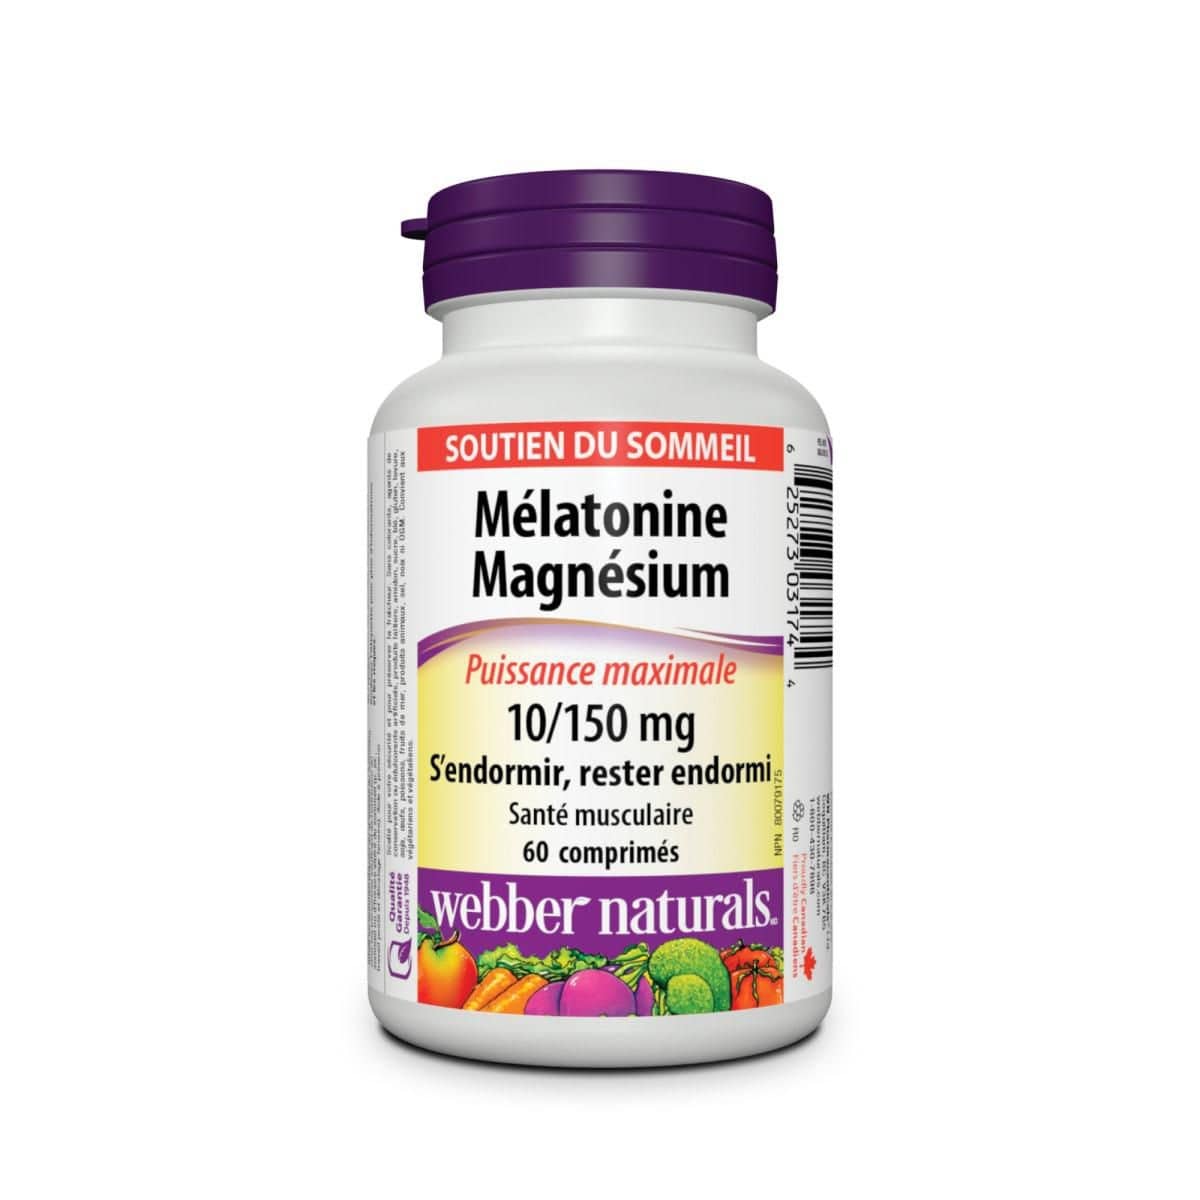 Product label for webber naturals Melatonin Magnesium Maximum Strength 10/150 mg (60 tablets) in French